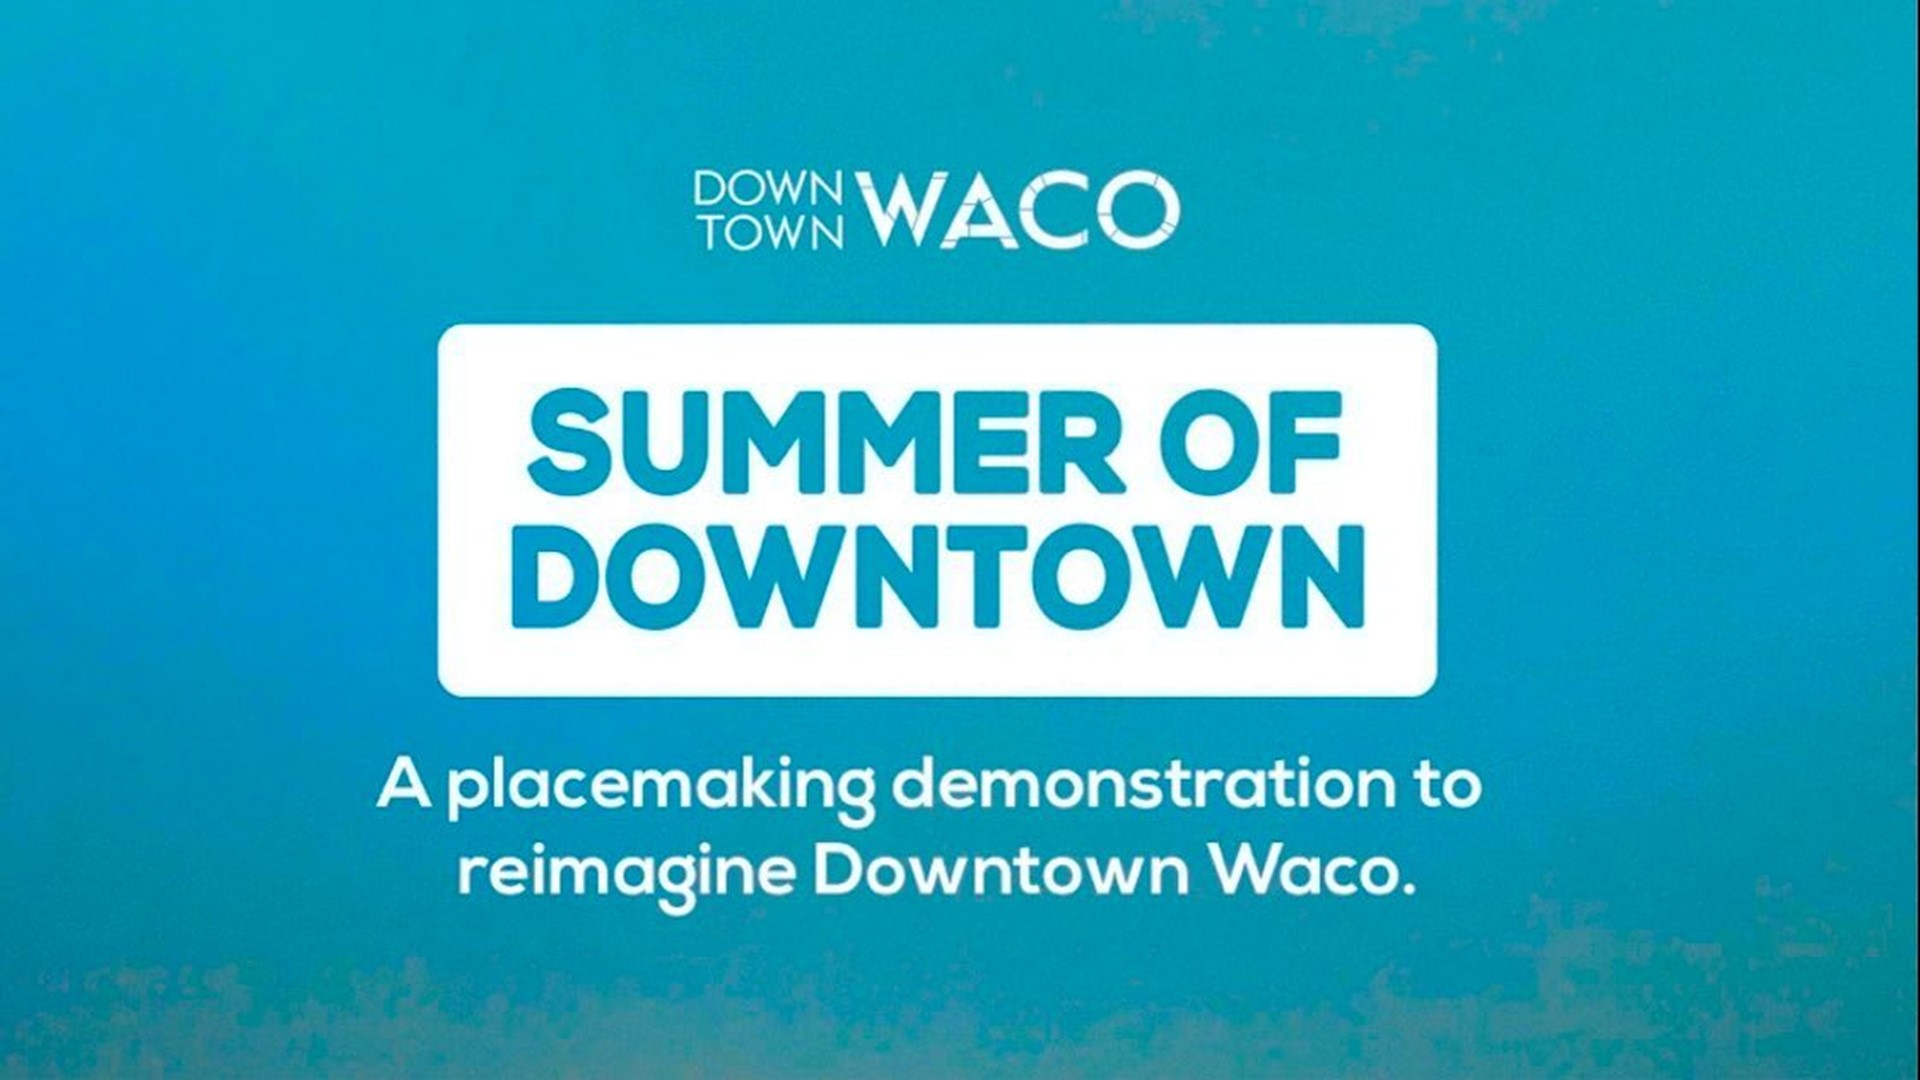 The projects include adding more free public parking and helping people find their way around the downtown area as well as a colorful pedestrian plaza.